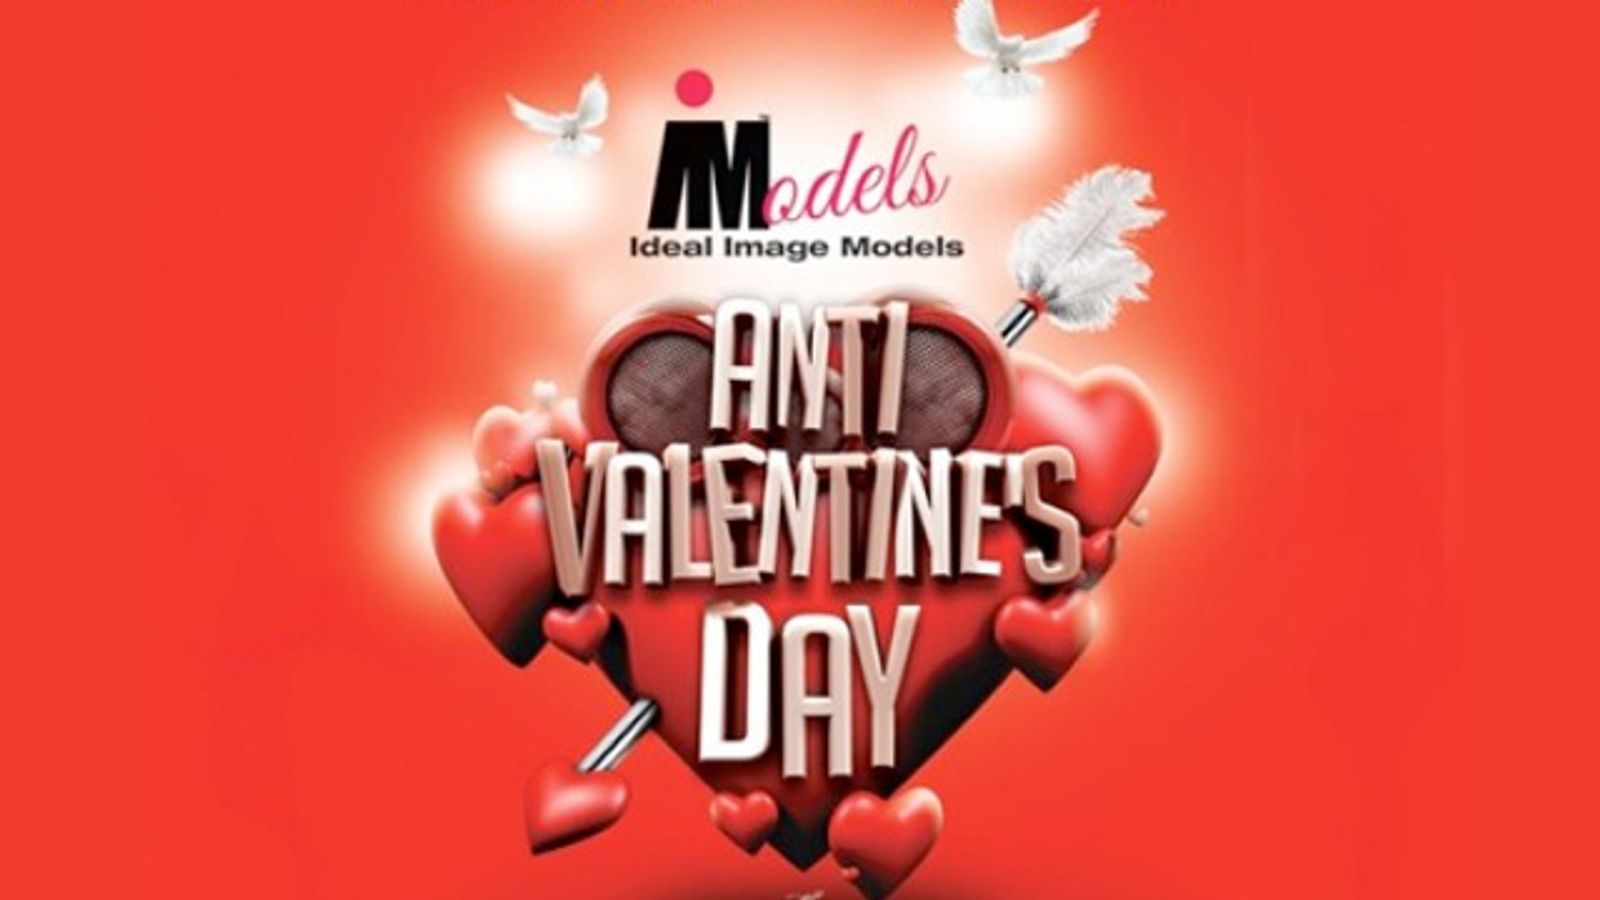 Ideal Image Models Host Valentine's Day Party in Hollywood